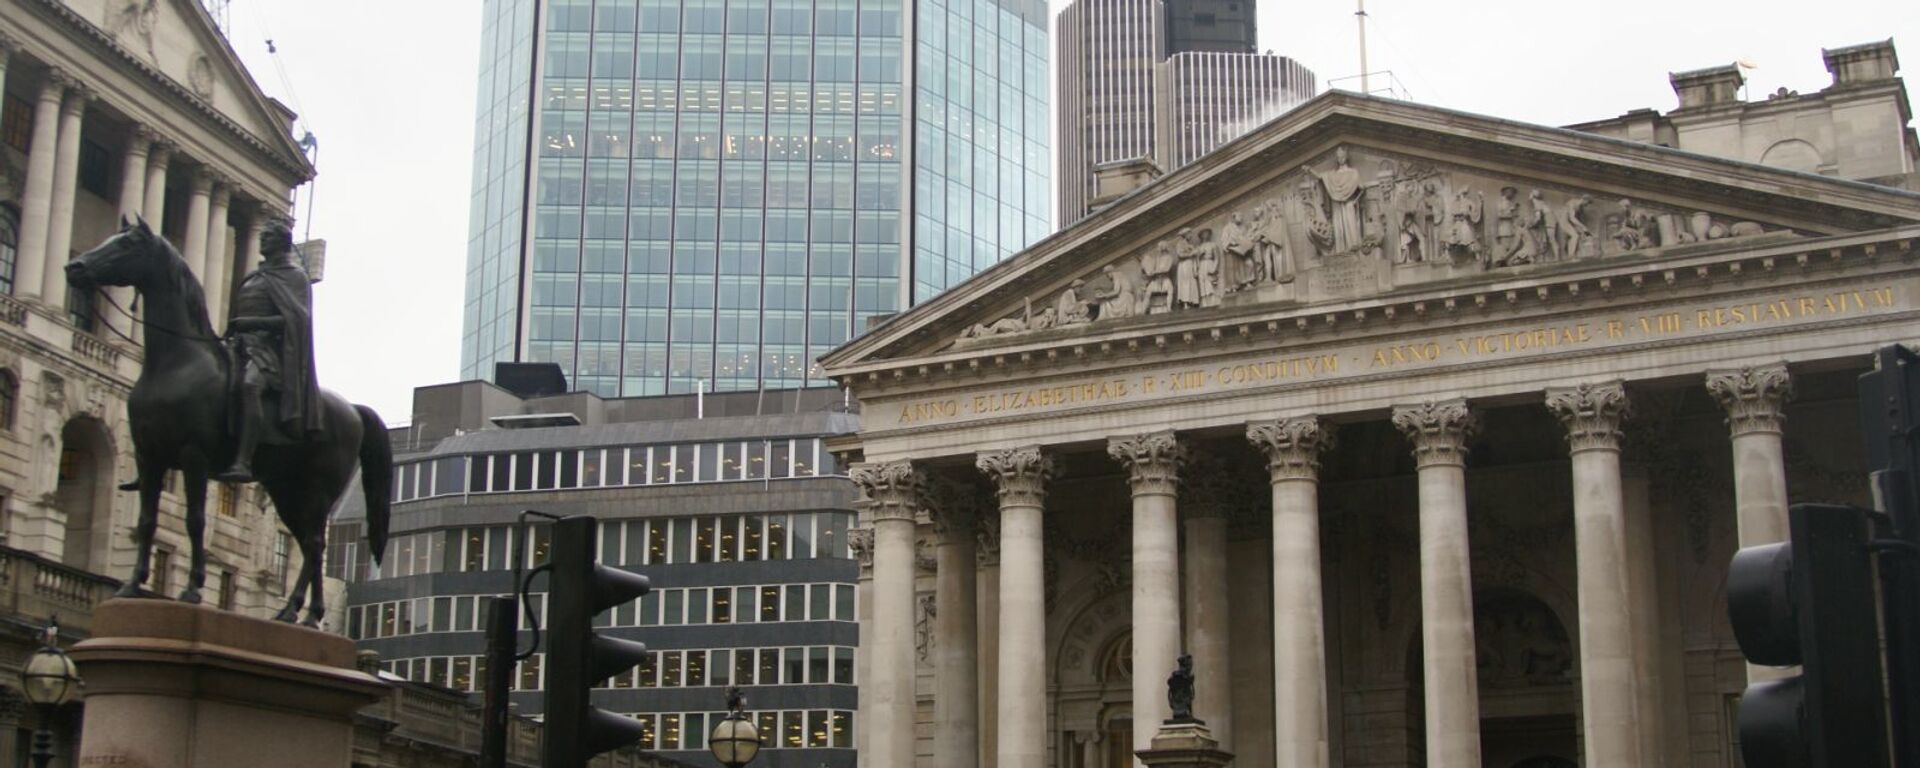 London Stock Exchange Tower and the Bank of England to the left - Sputnik International, 1920, 02.09.2022